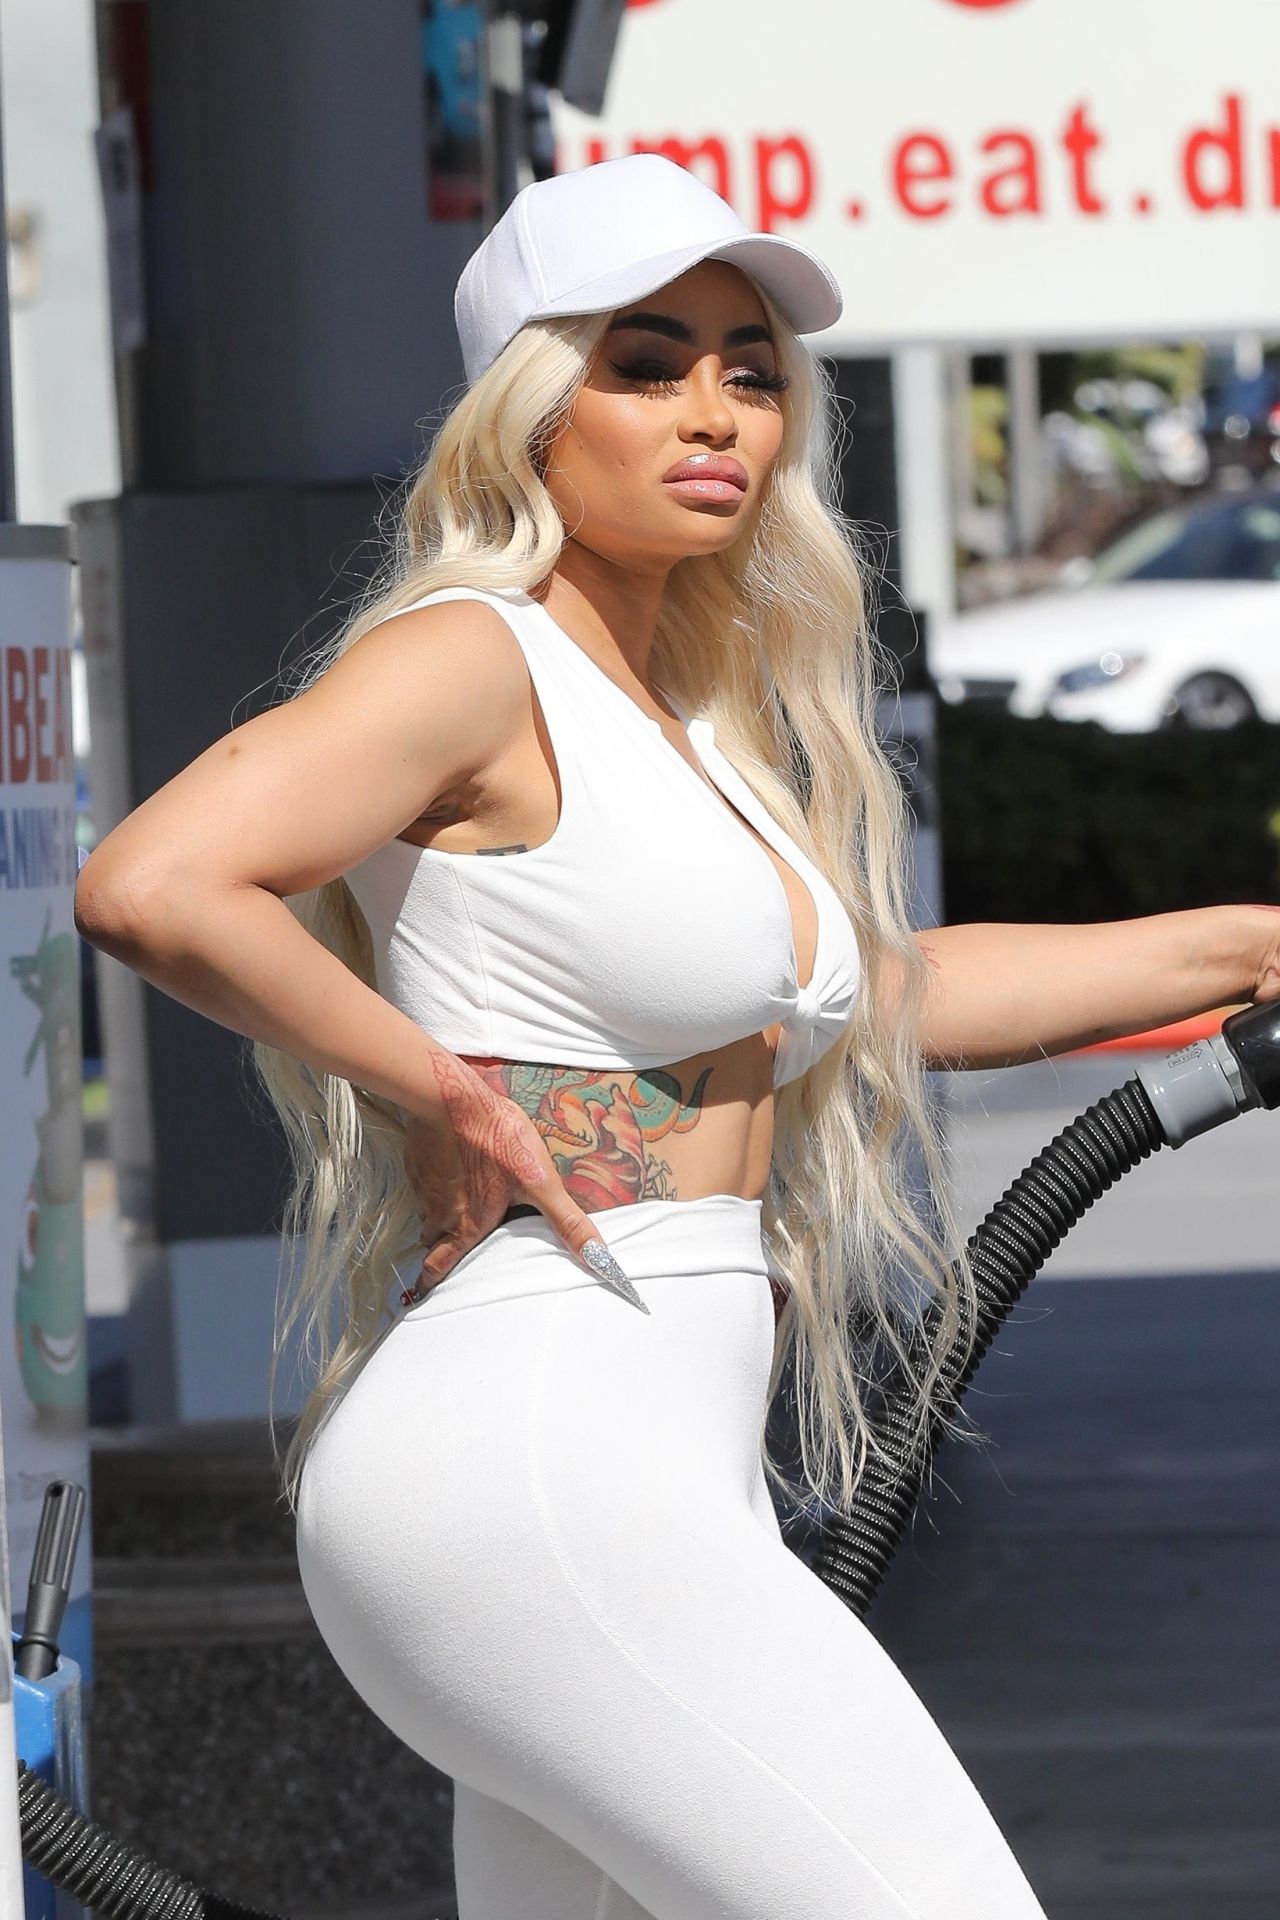 Blac Chyna in an All-White Outfit - Pumping Gas in Calabasas 08/09/2020 